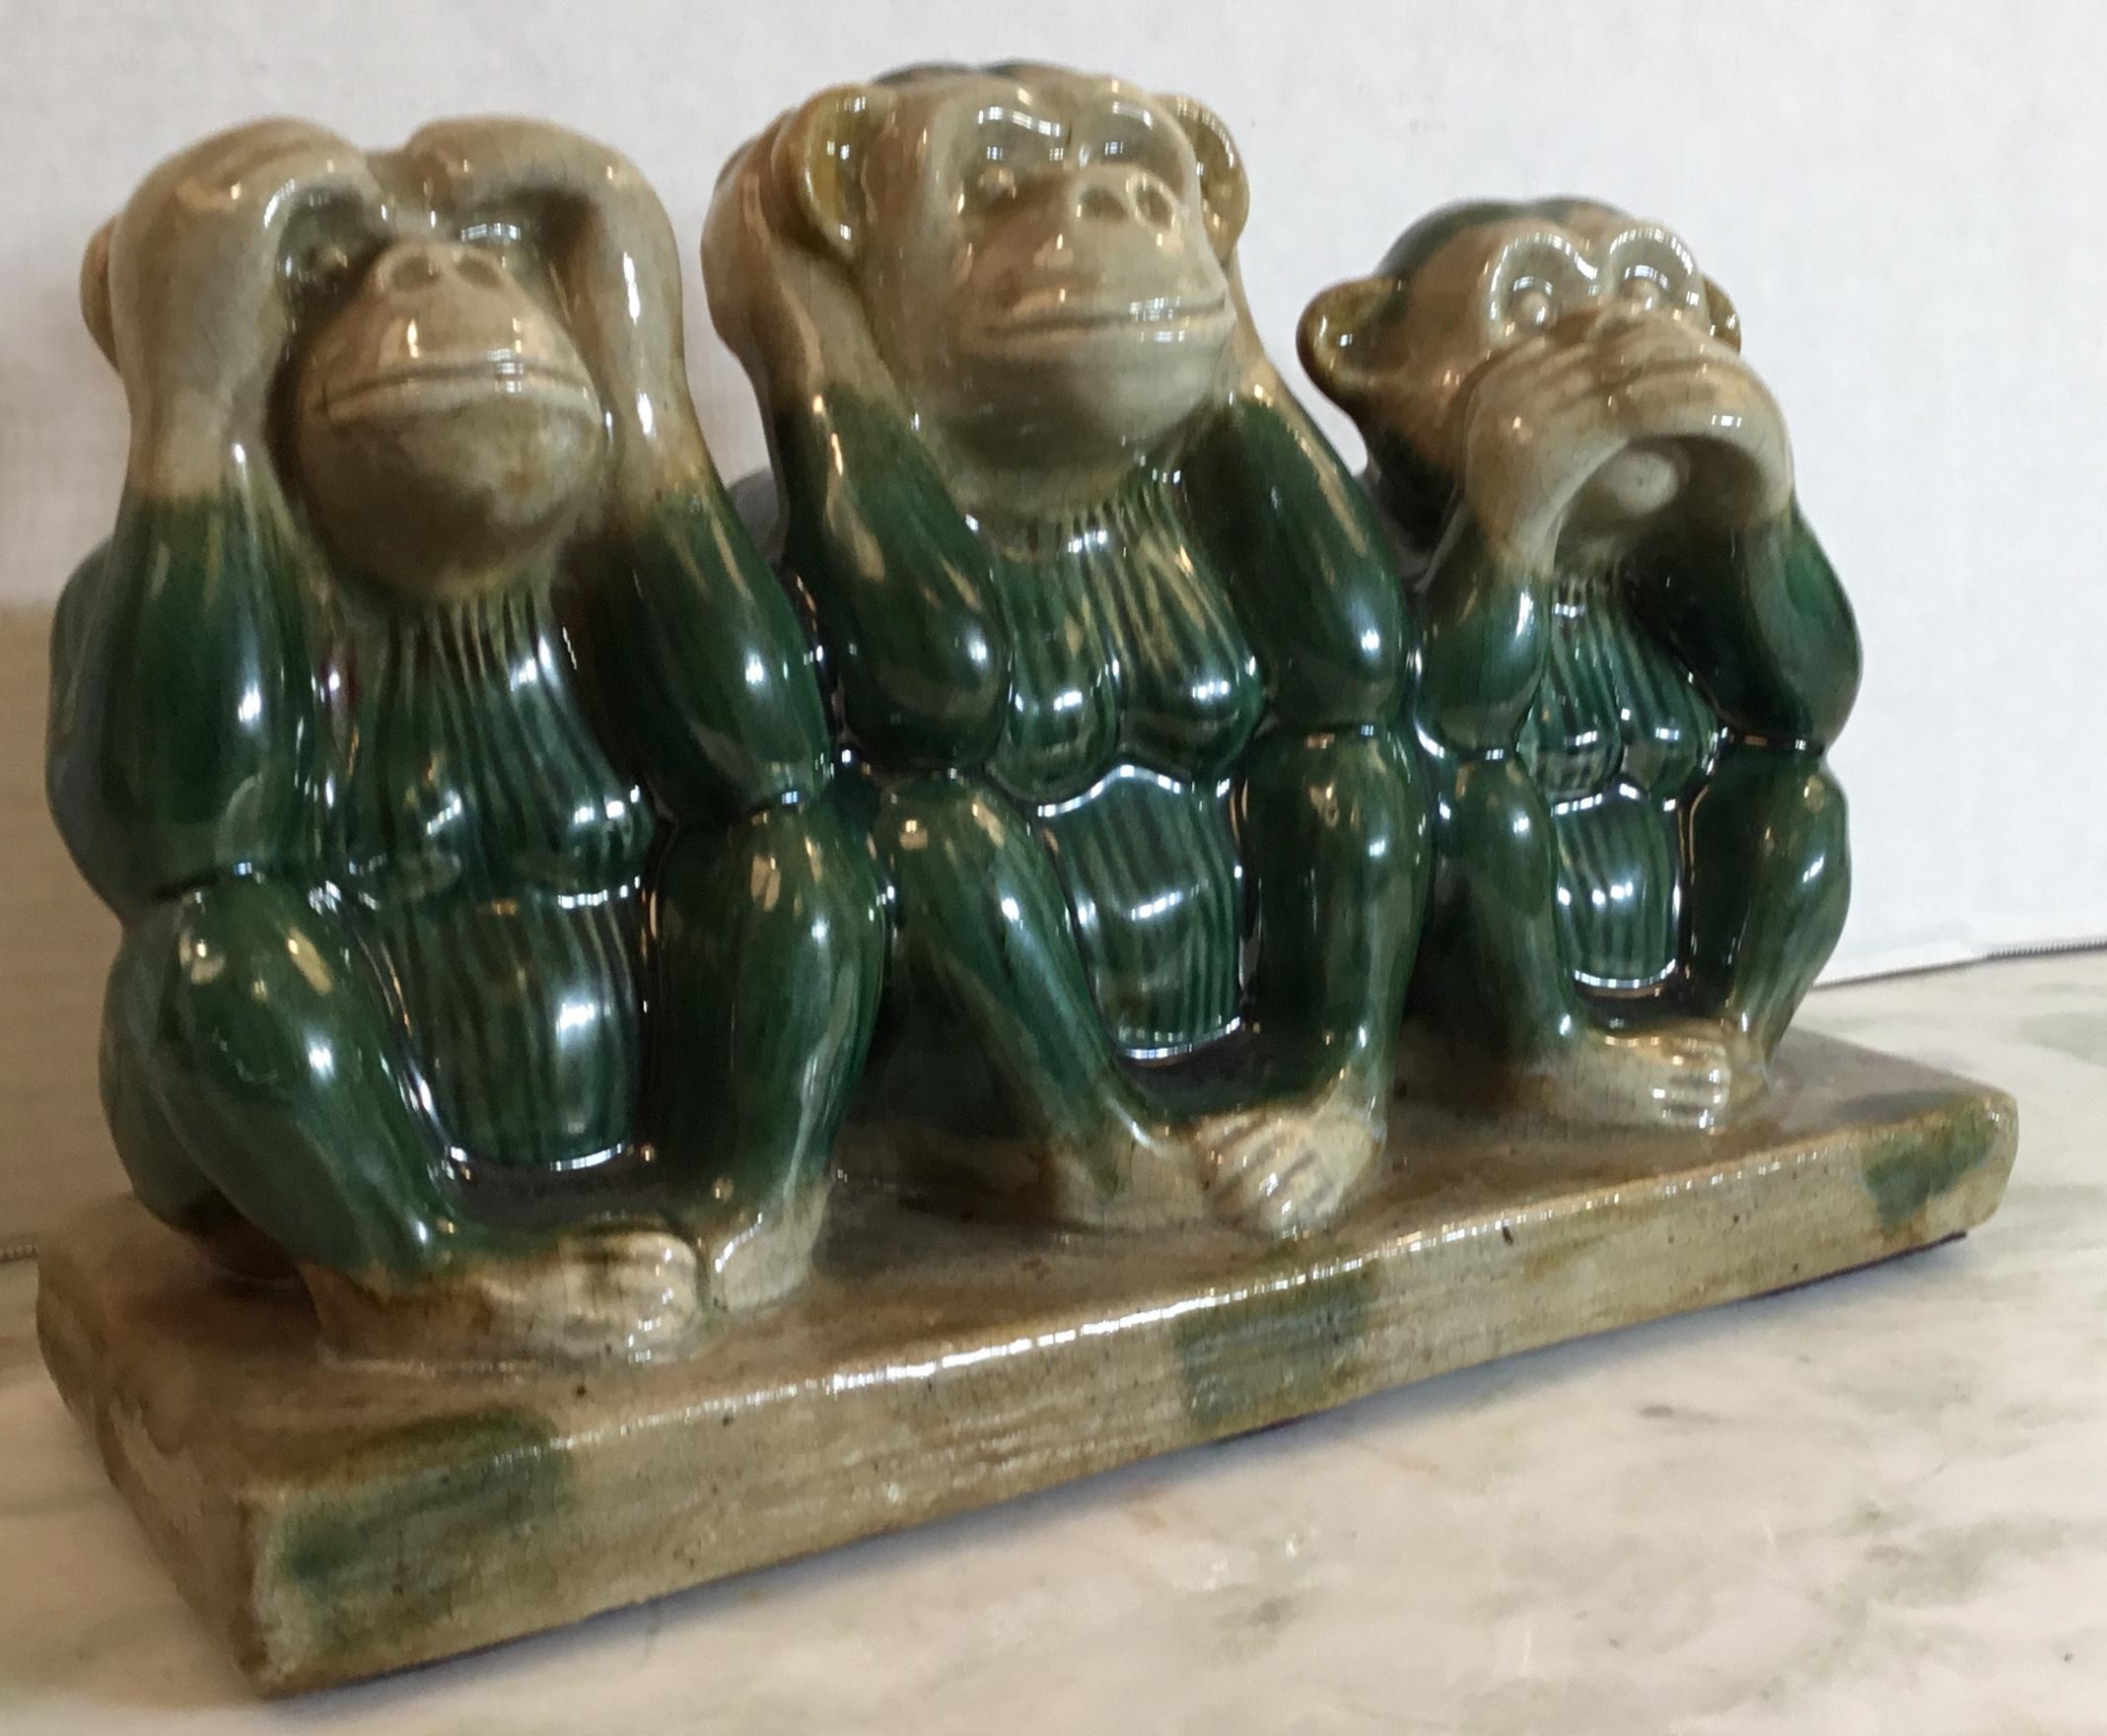 Funky heavy ceramic statue of the three monkey ‘See NoEvil, Hear No Evil, Speak No Evil. Hand painted and glazed, interesting facial expression, beautiful object of art for display.
Signed in the bottom by the artist.